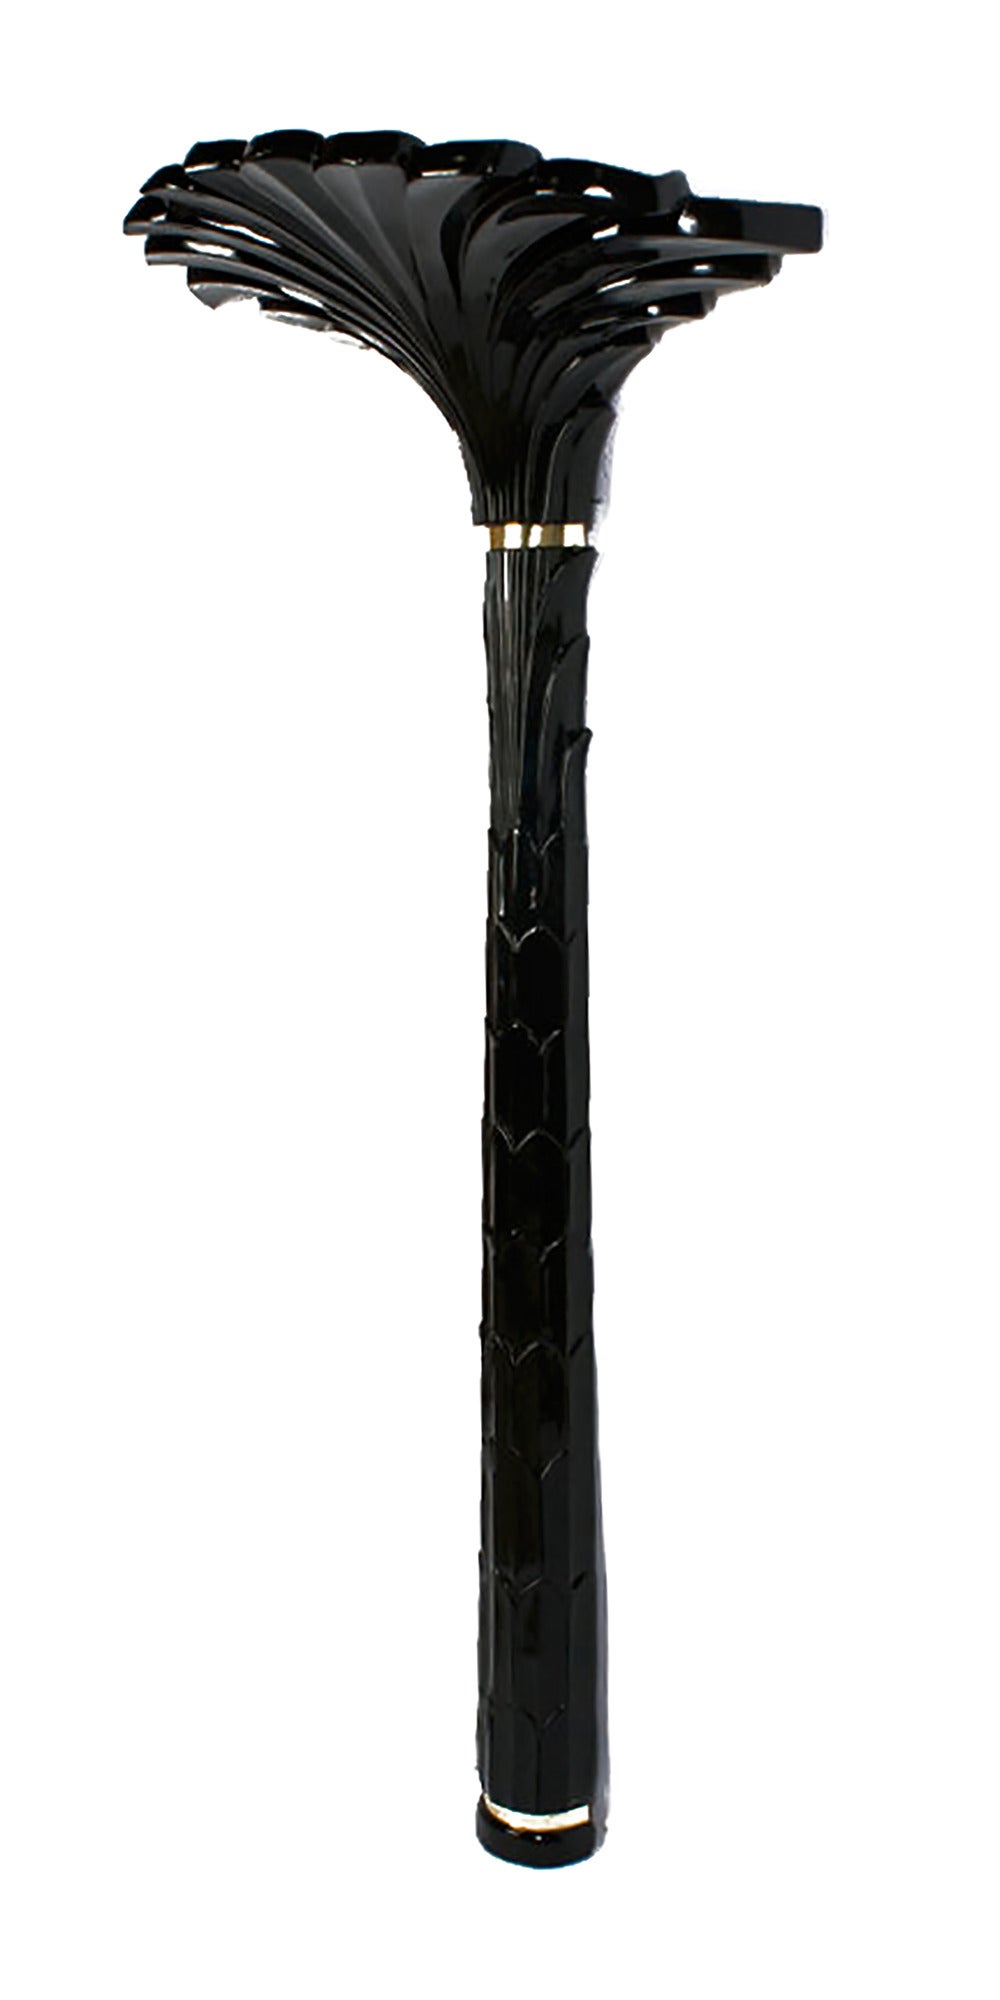 Undoubtedly inspired by the work of Serge Roche, this torchiere is designed to mount to a wall for support. The body is of wood, carved to resemble a palm tree and heavily black lacquered. The column is circumscribed by two brass bands, used to